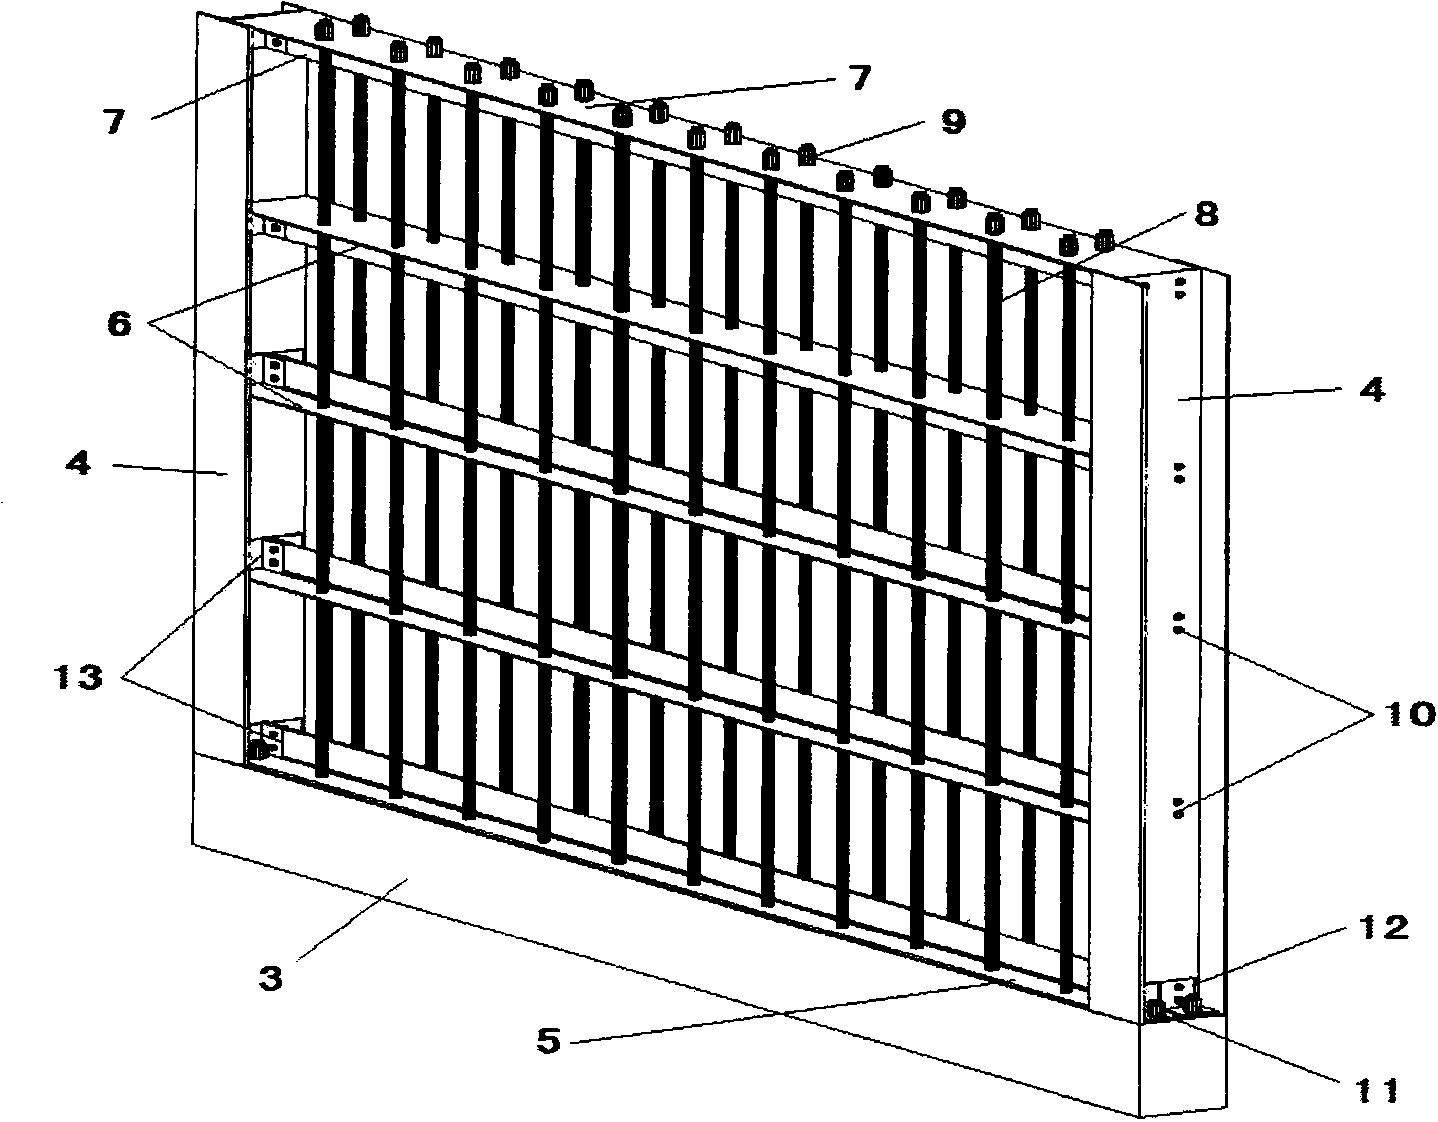 Concrete explosion-proof wall with embedded steel framework